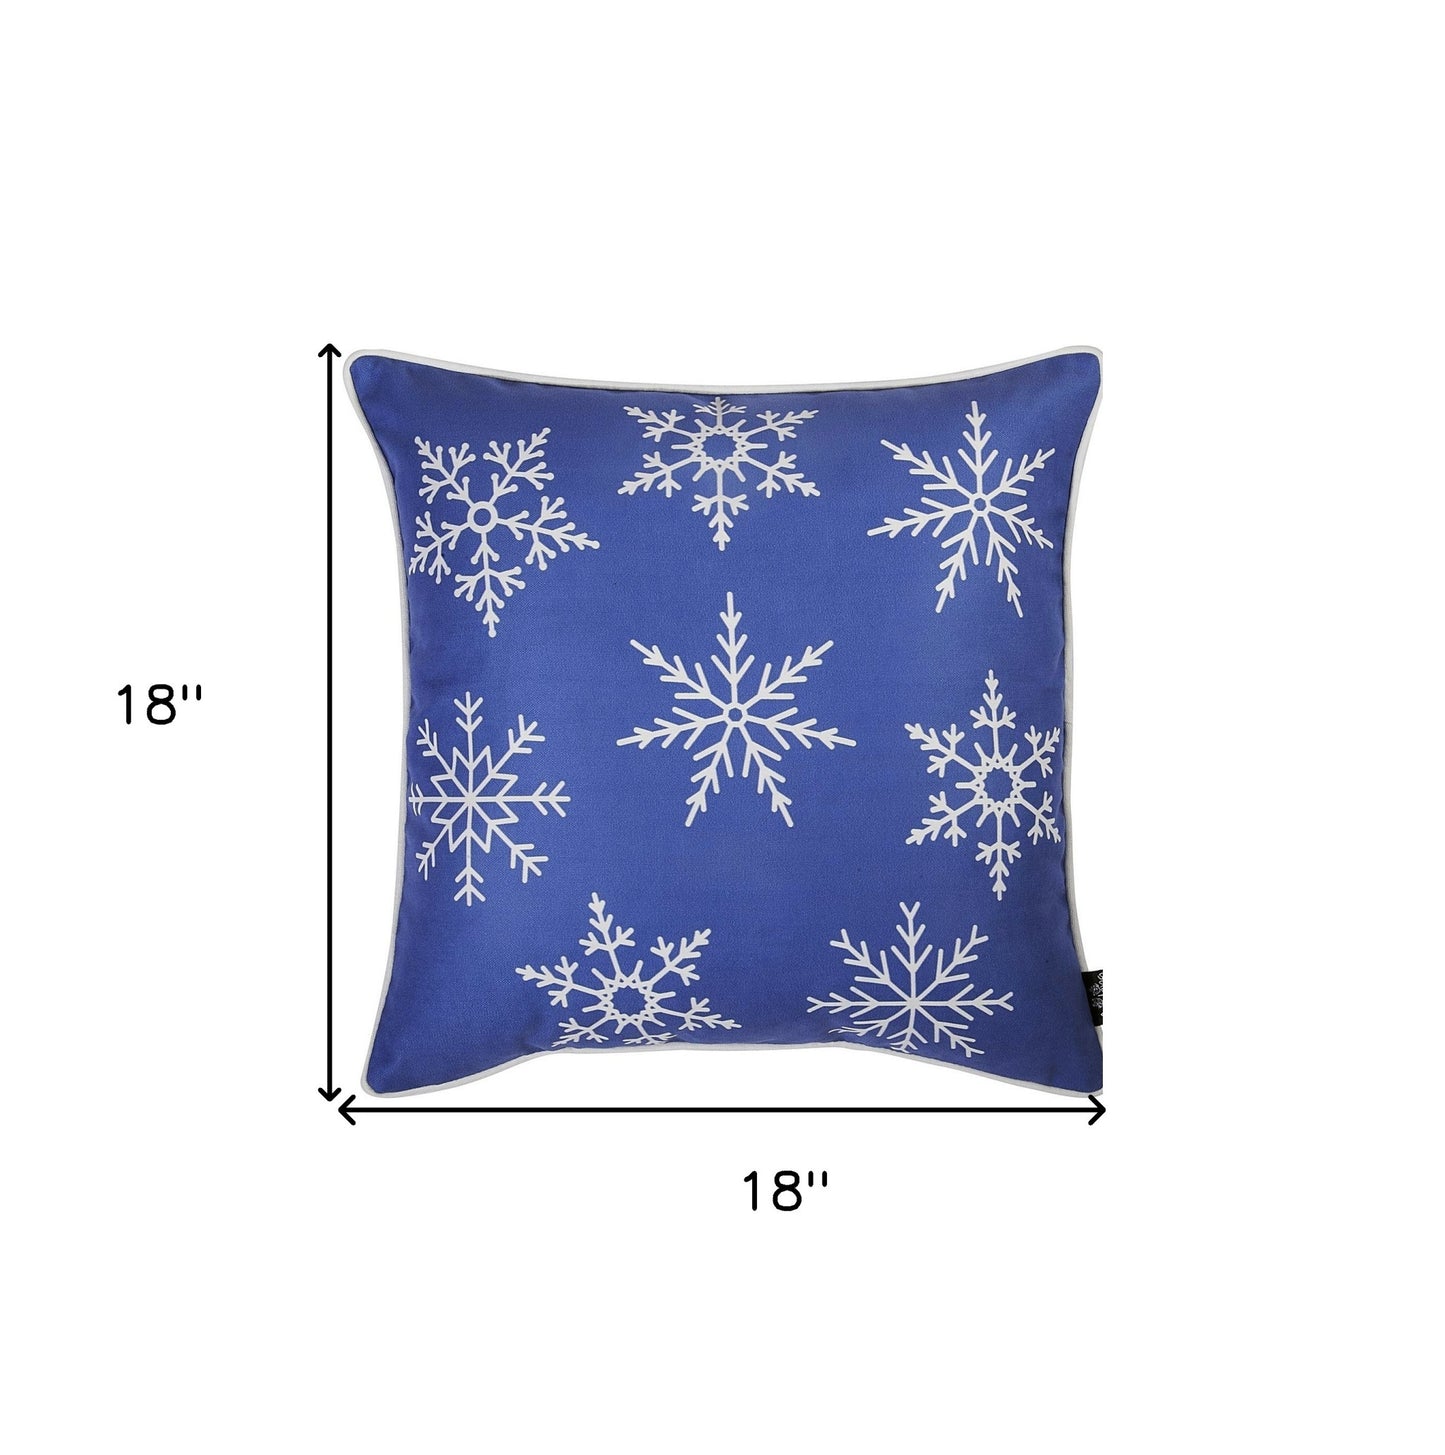 Set Of 4 18" Christmas Snowflakes Throw Pillow Cover In Blue